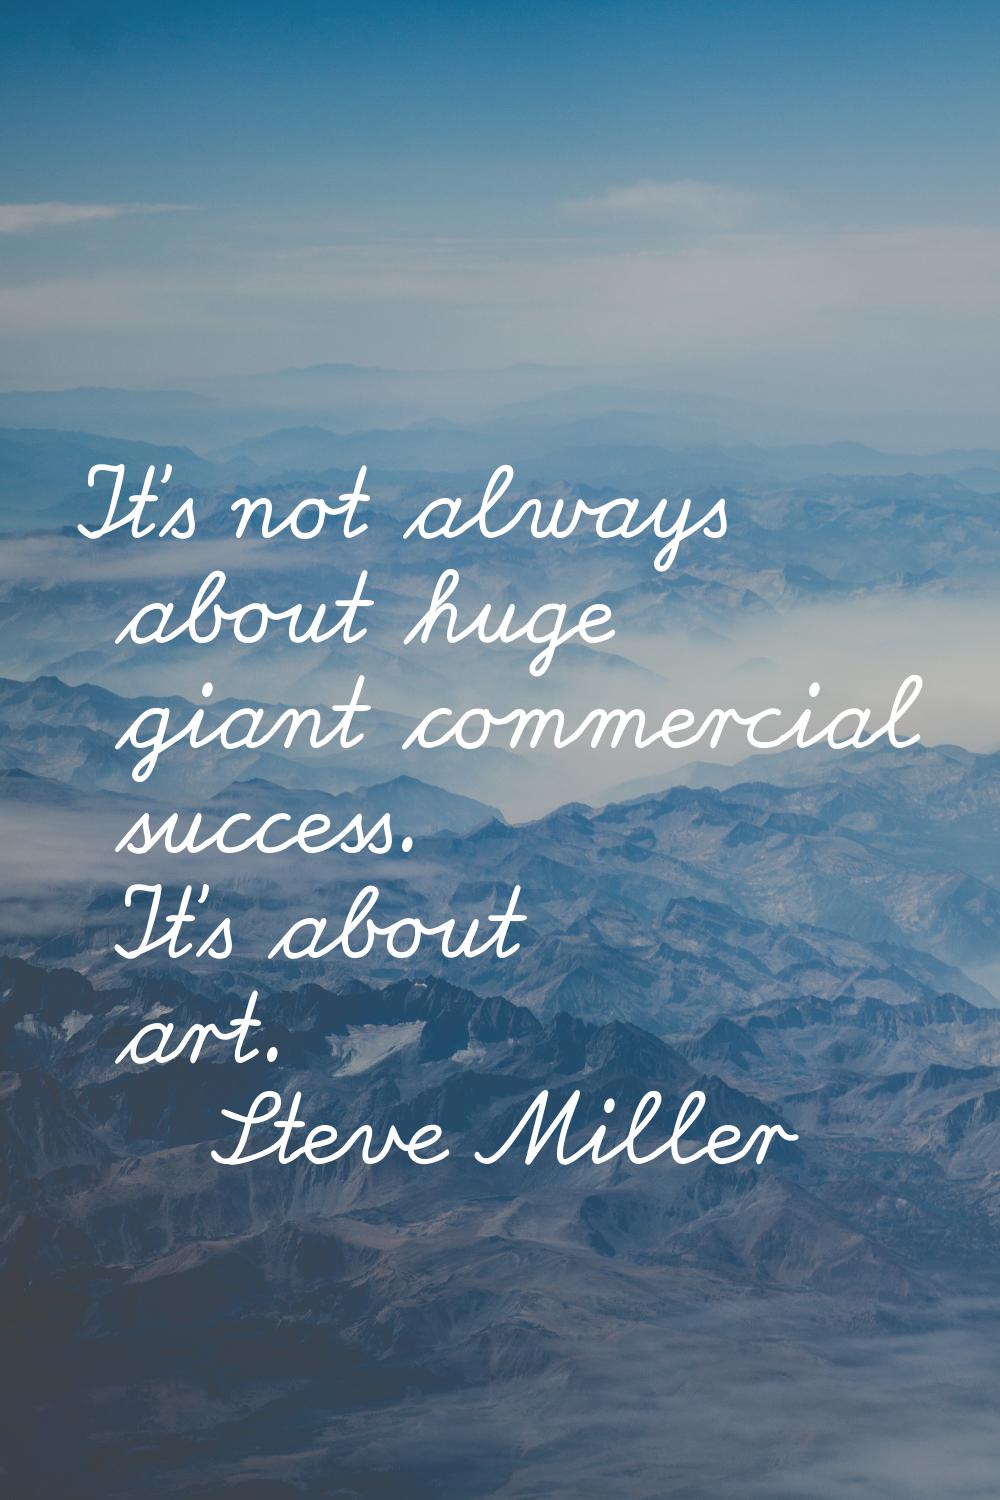 It's not always about huge giant commercial success. It's about art.